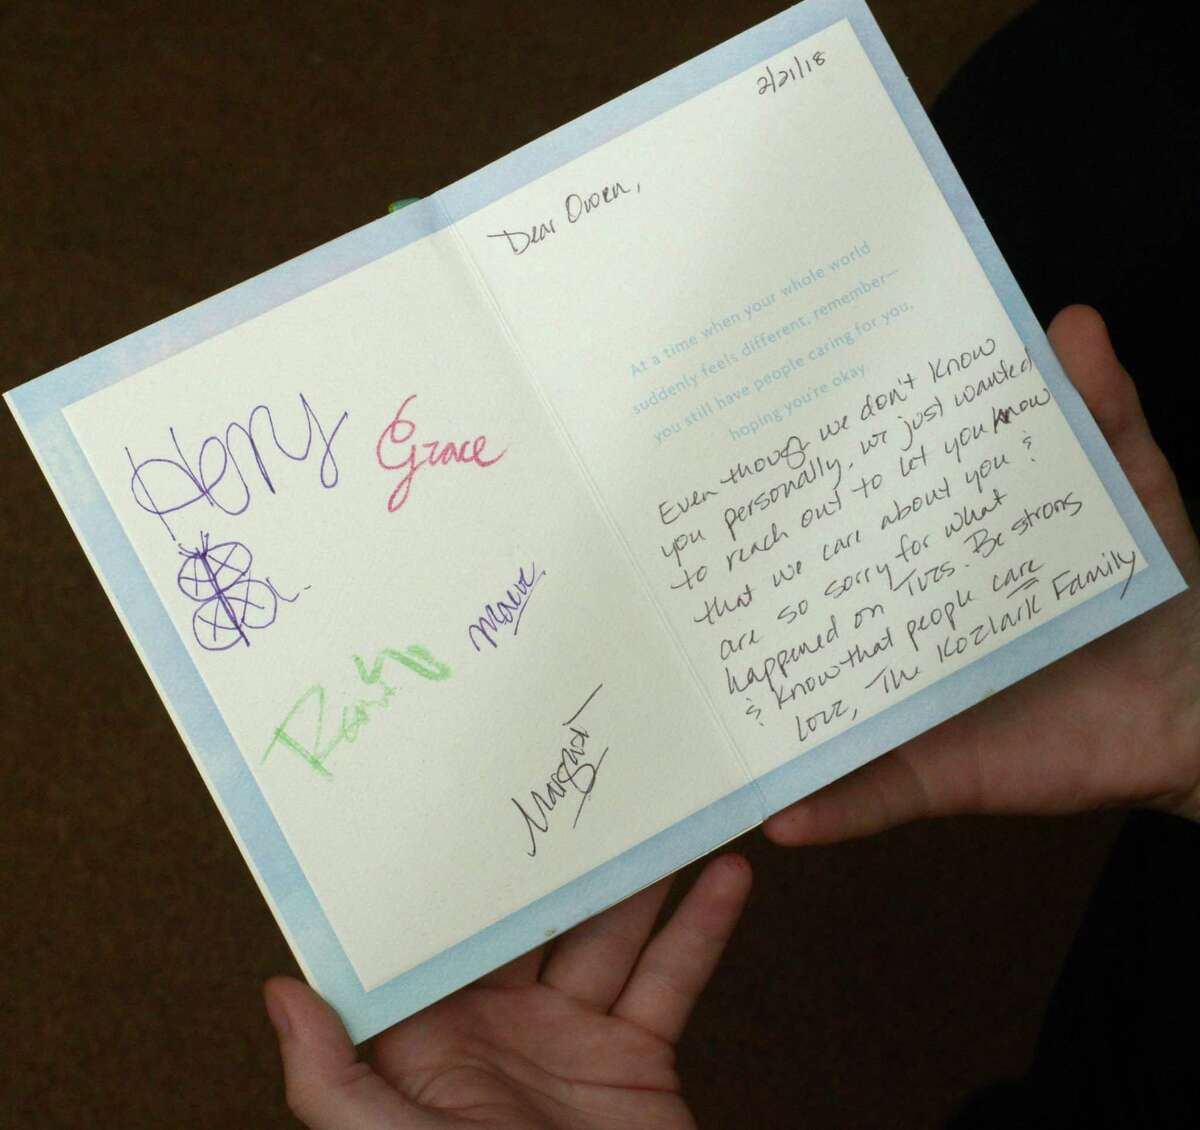 A card of sympathy was sent to Heather Florian and her son Owen, 17, in their home. Florian says her son is being bullied and called a school shooter after the shelter alert Tuesday at Norwalk High School, where he was briefly questioned by police regarding the incident.